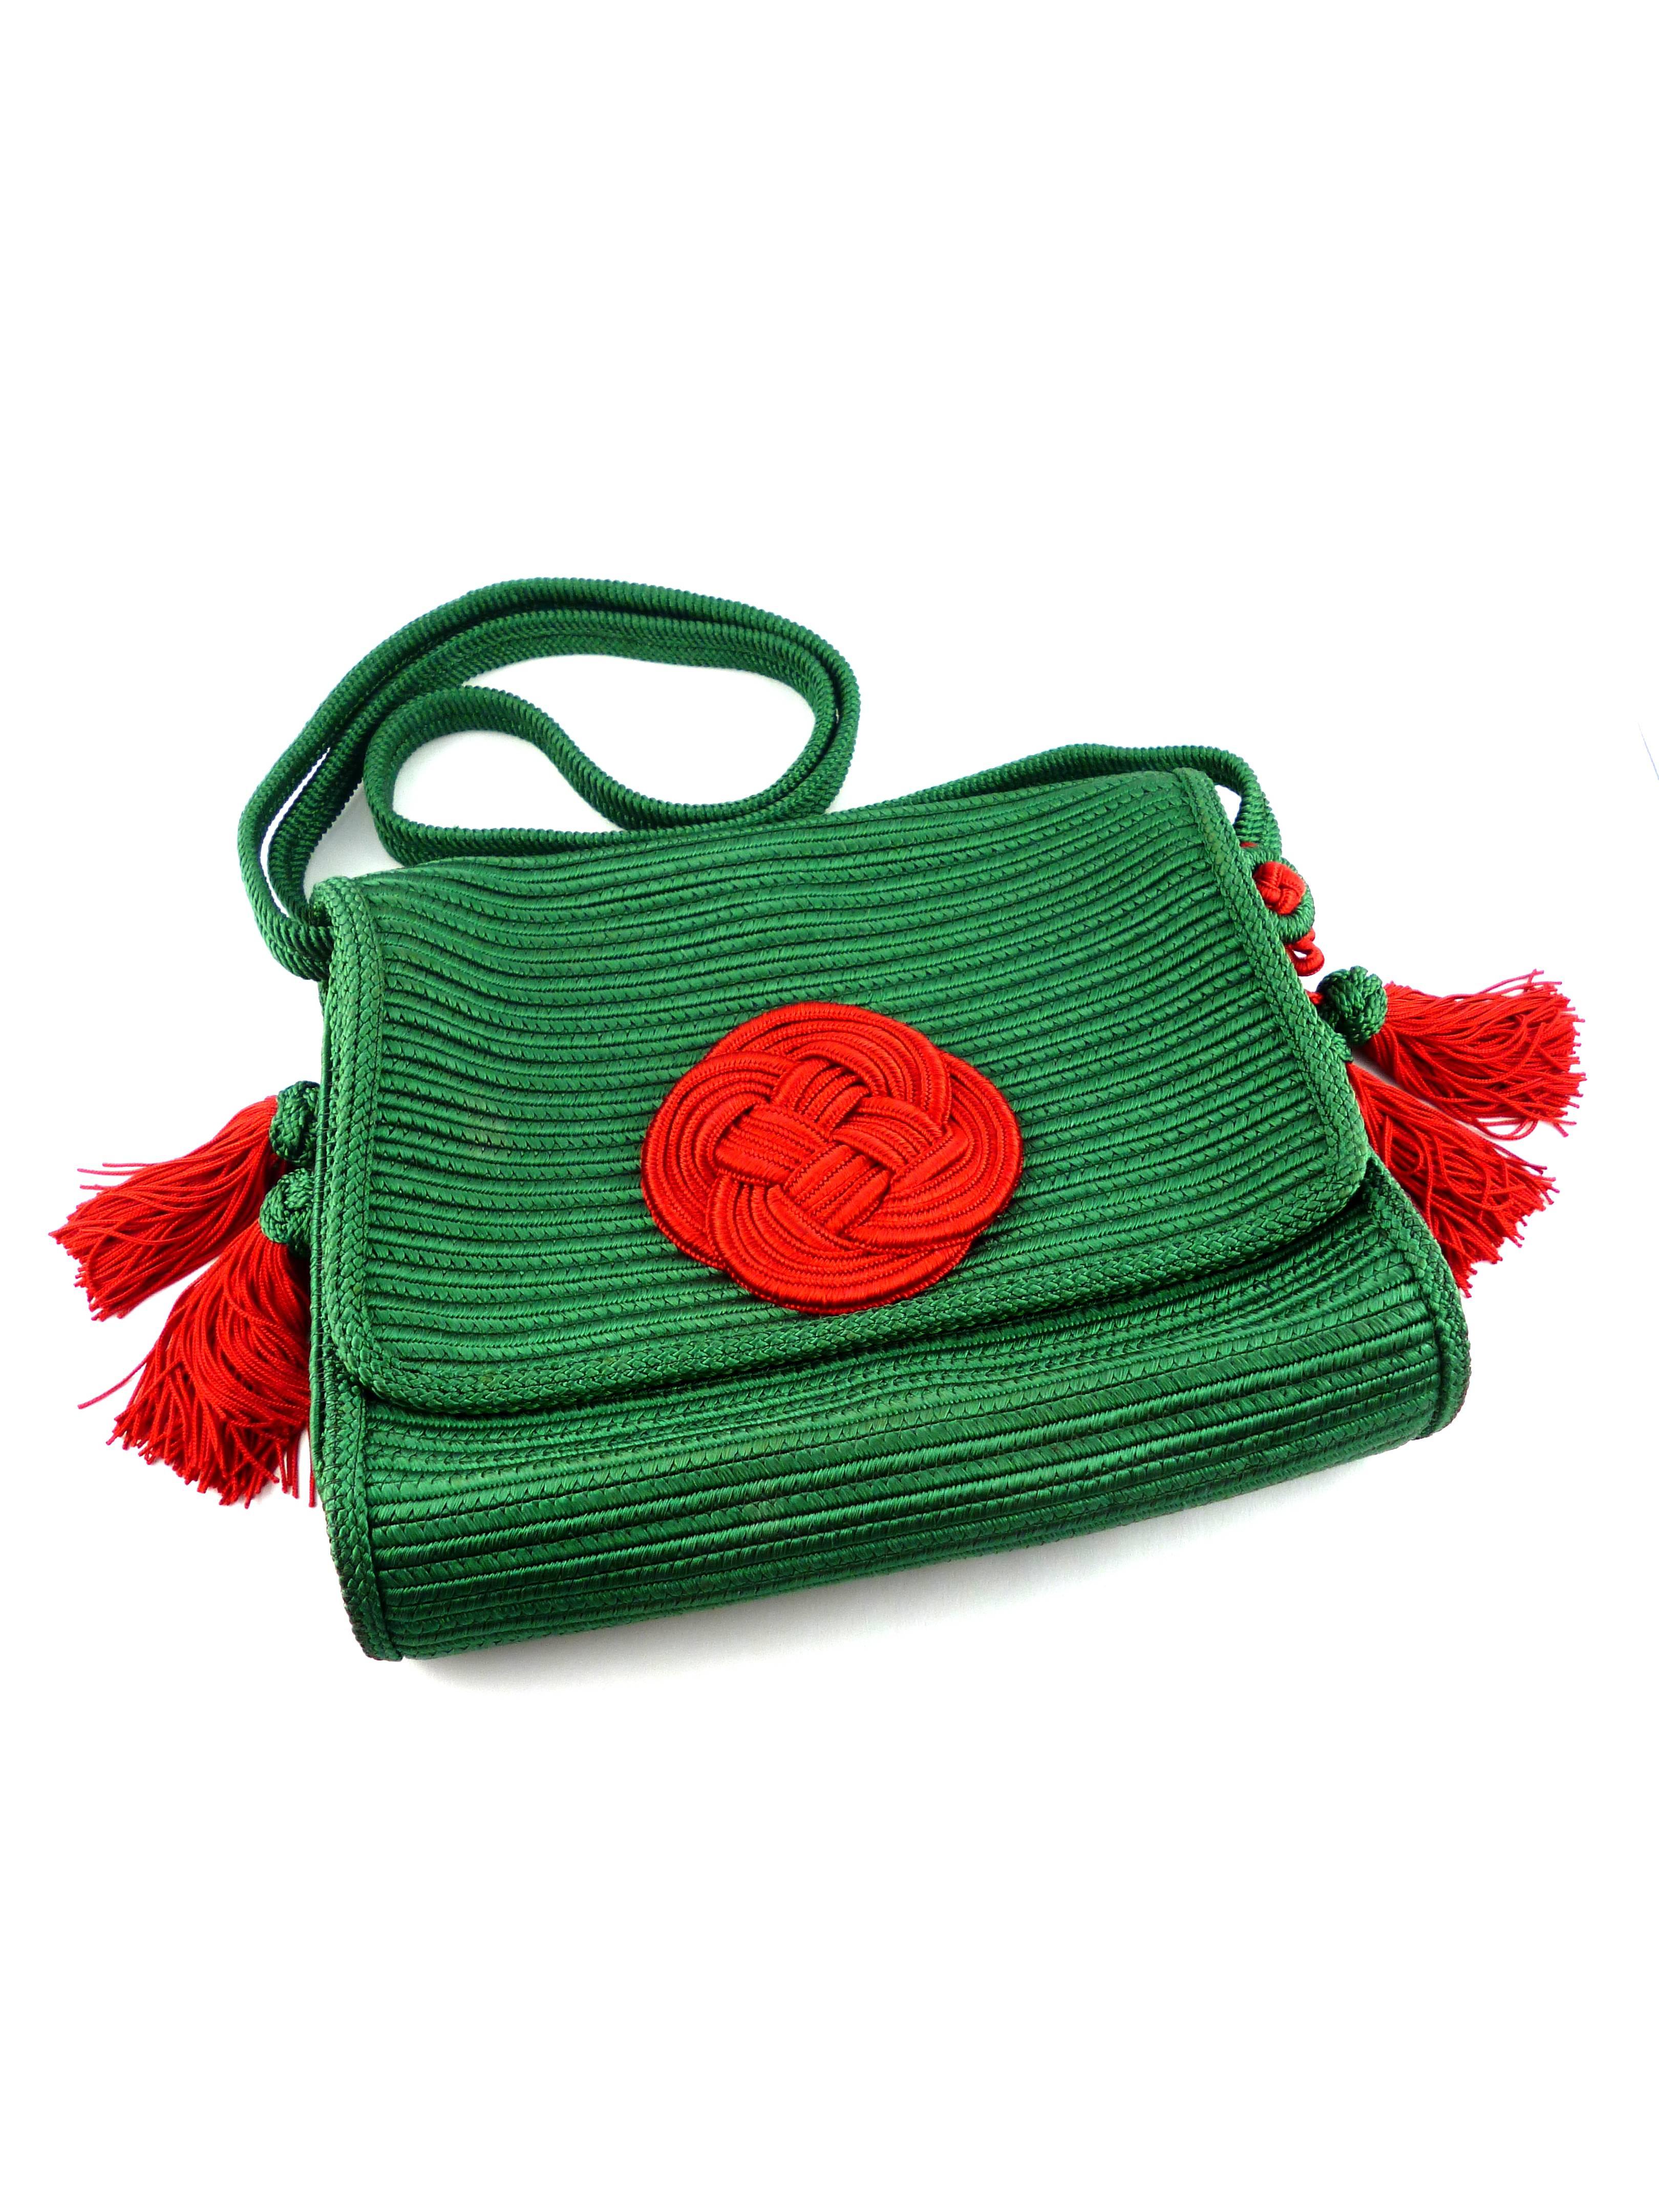 YVES SAINT LAURENT vintage rare 1977 Chinese Collection passementerie silk tassel purse bag.

Green silk body adorned with a massive red passementerie ornament.
Green and red silk tassels on both sides.

Embossed on a tag Yves Saint Laurent